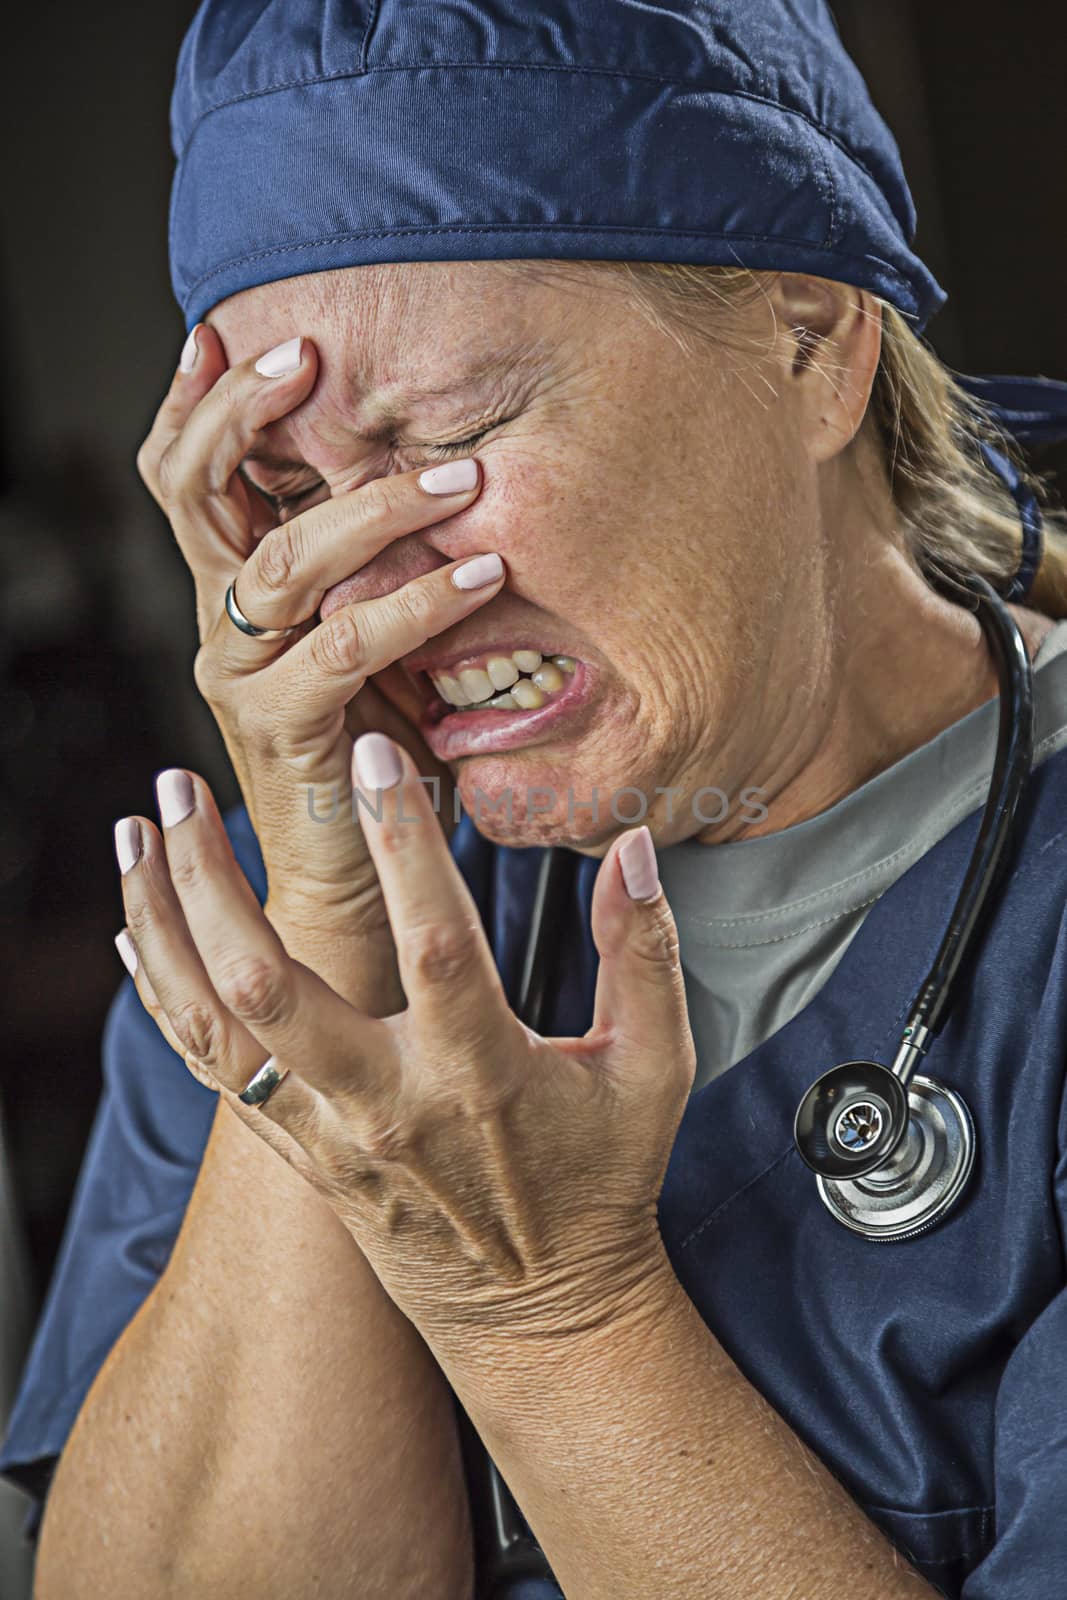 Agonizing Crying Female Doctor or Nurse by Feverpitched